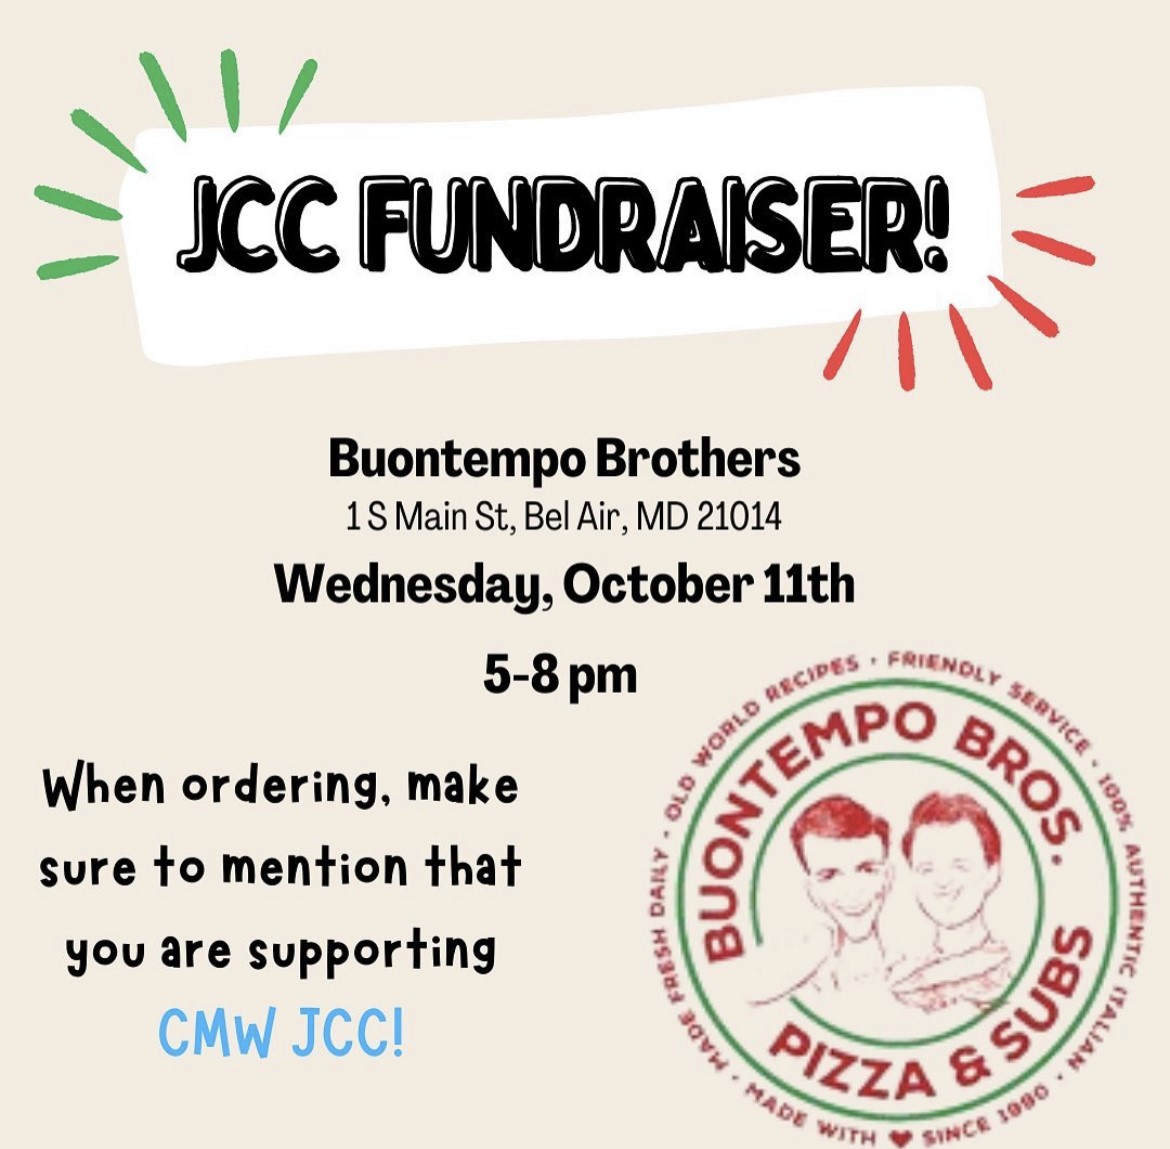 Come Support JCC